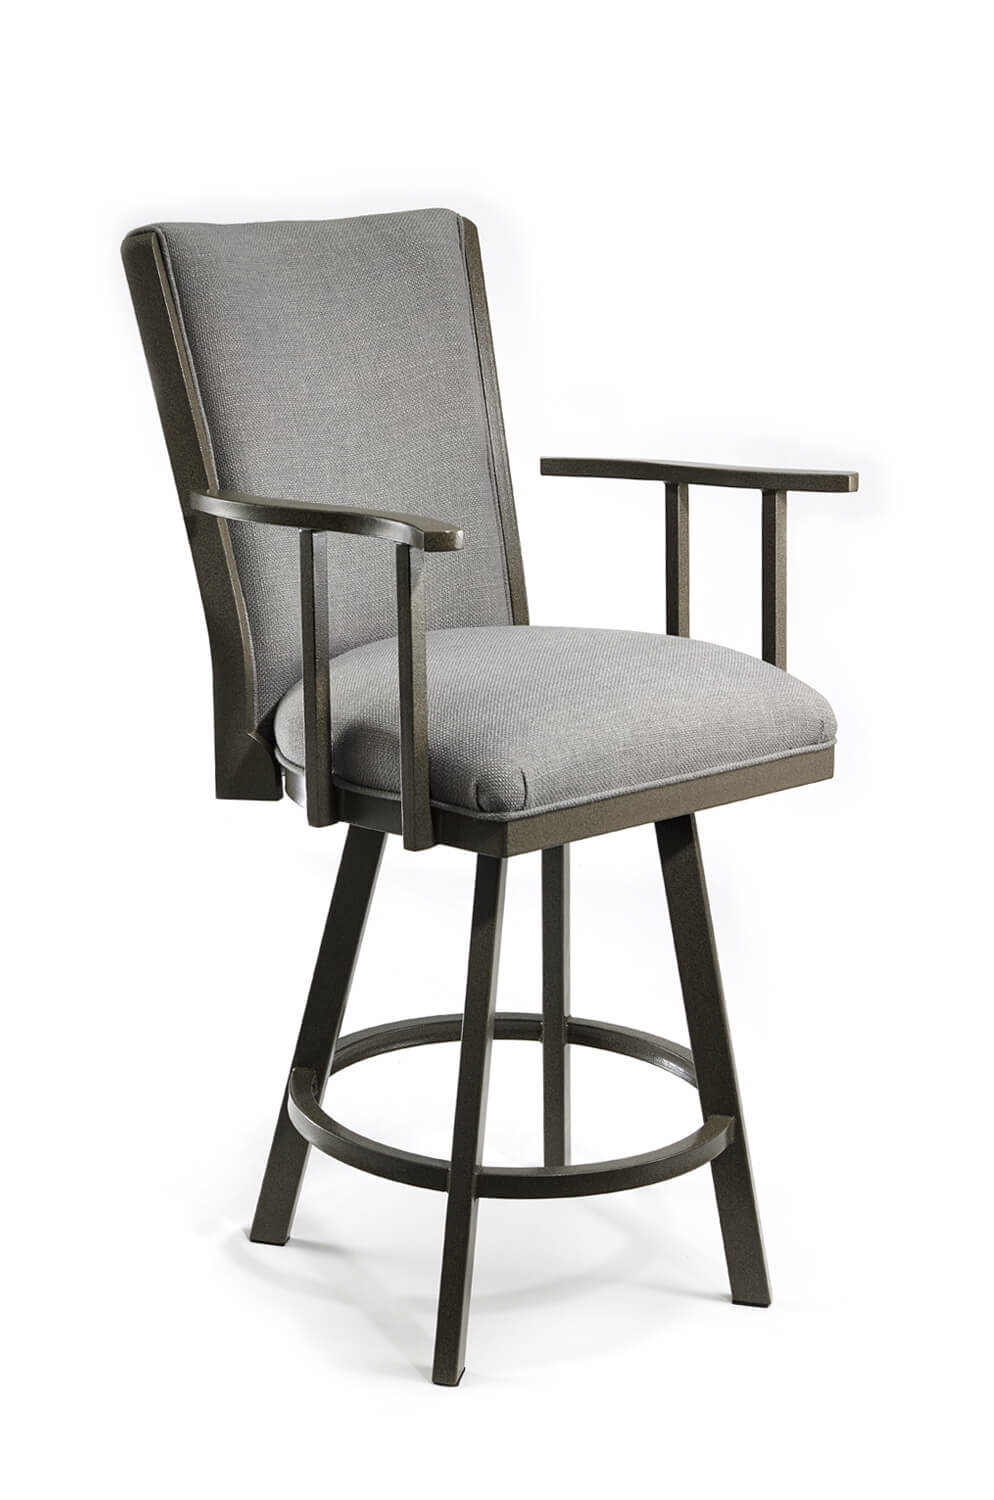 Comfortable Swivel Stool, Fabric Swivel Bar Stools With Back Support